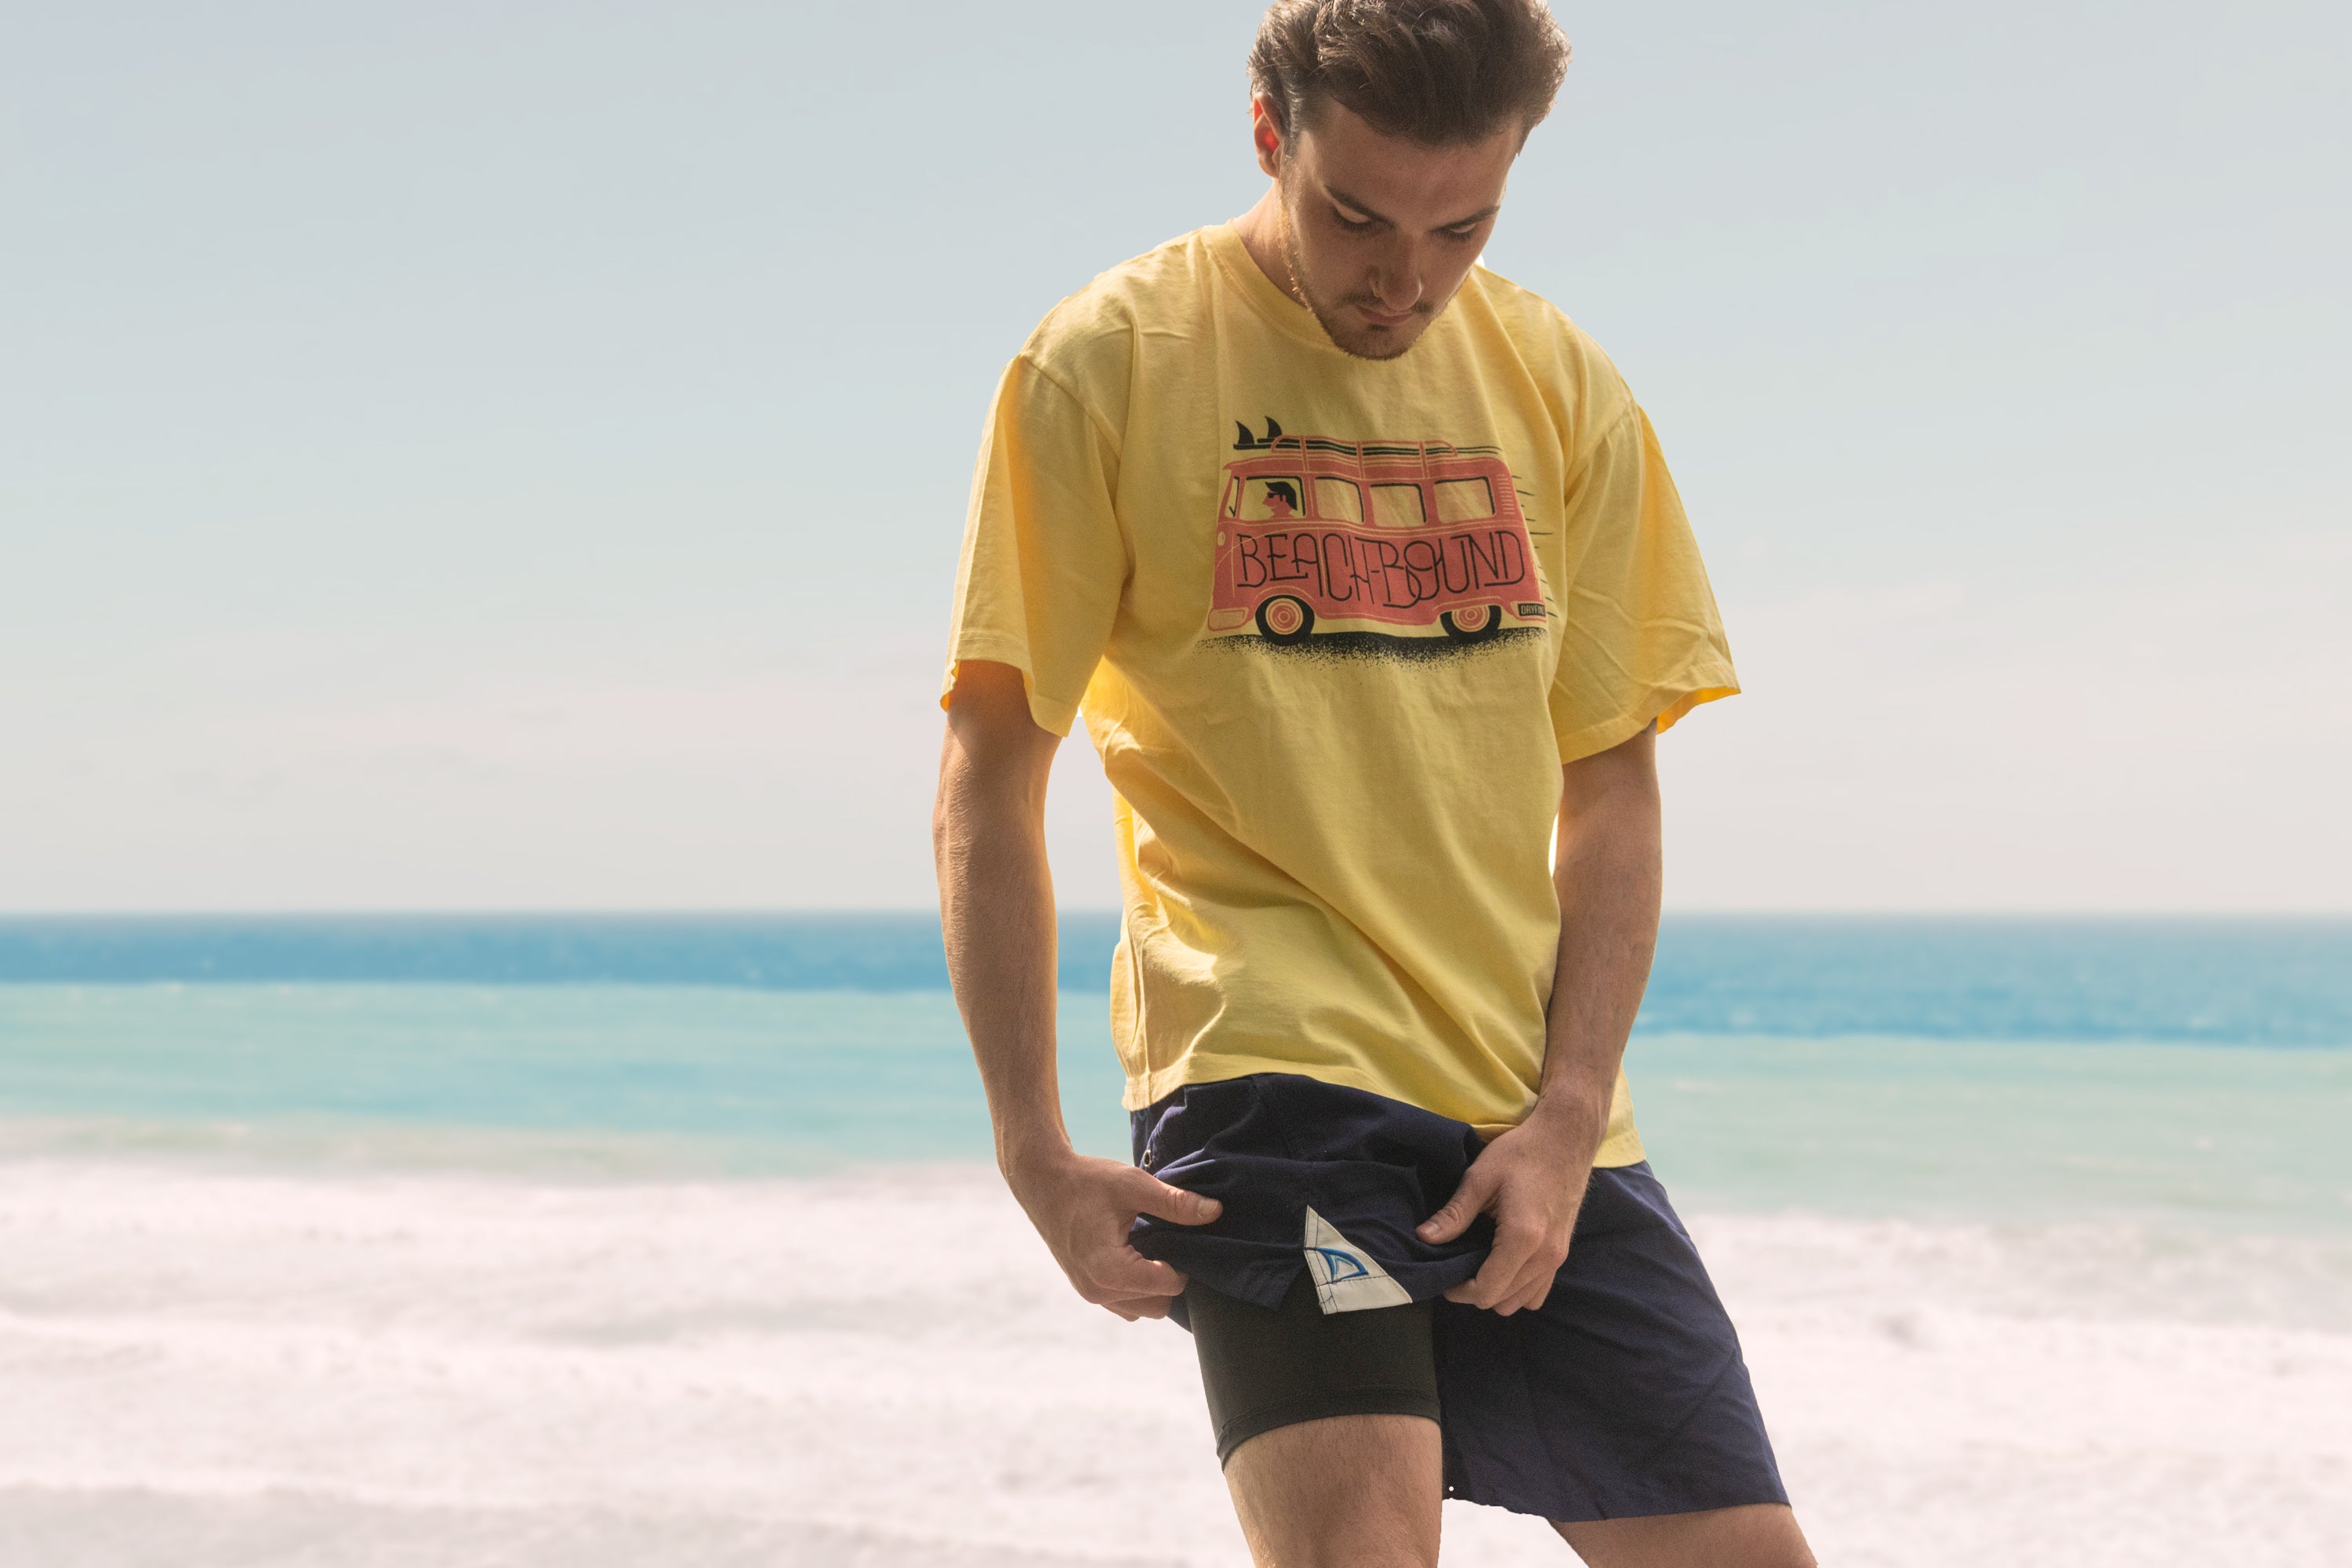 How to Prevent Chafing at the Beach